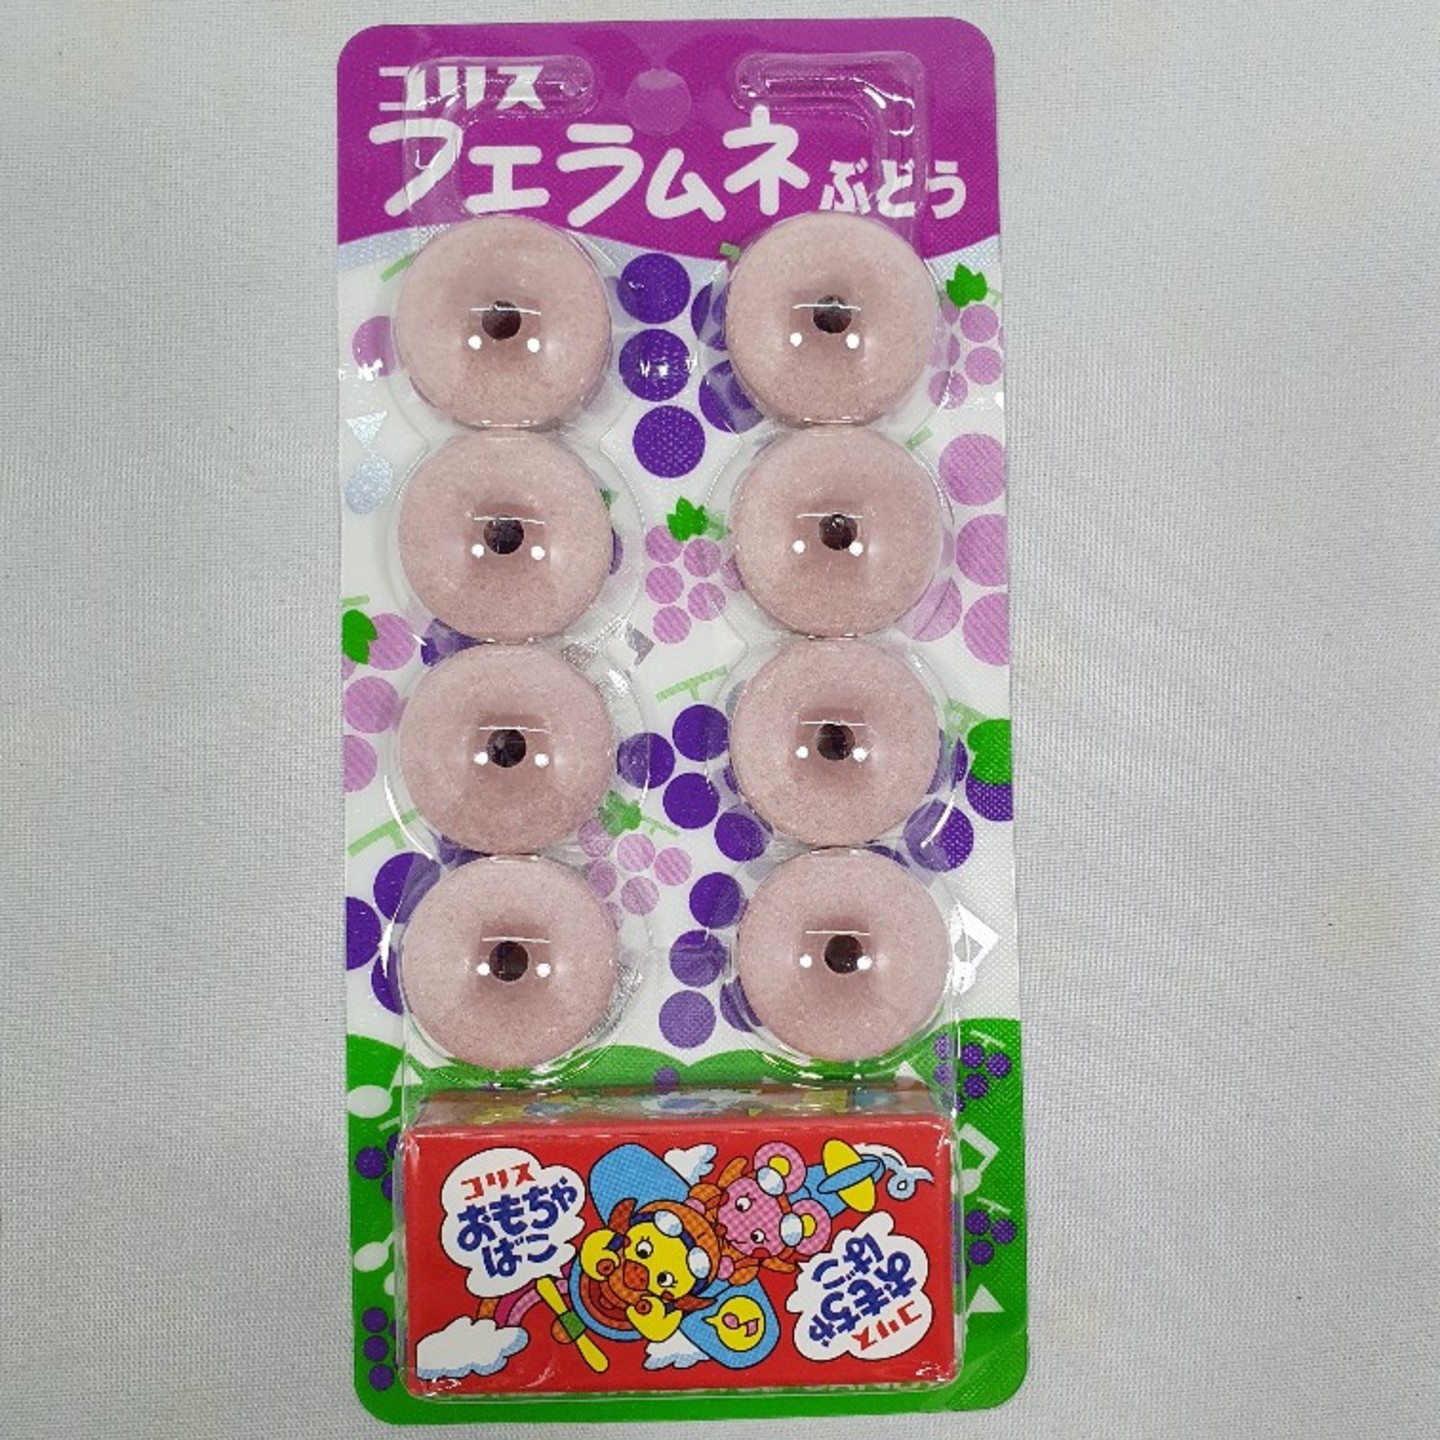 Whistle Candy Grape